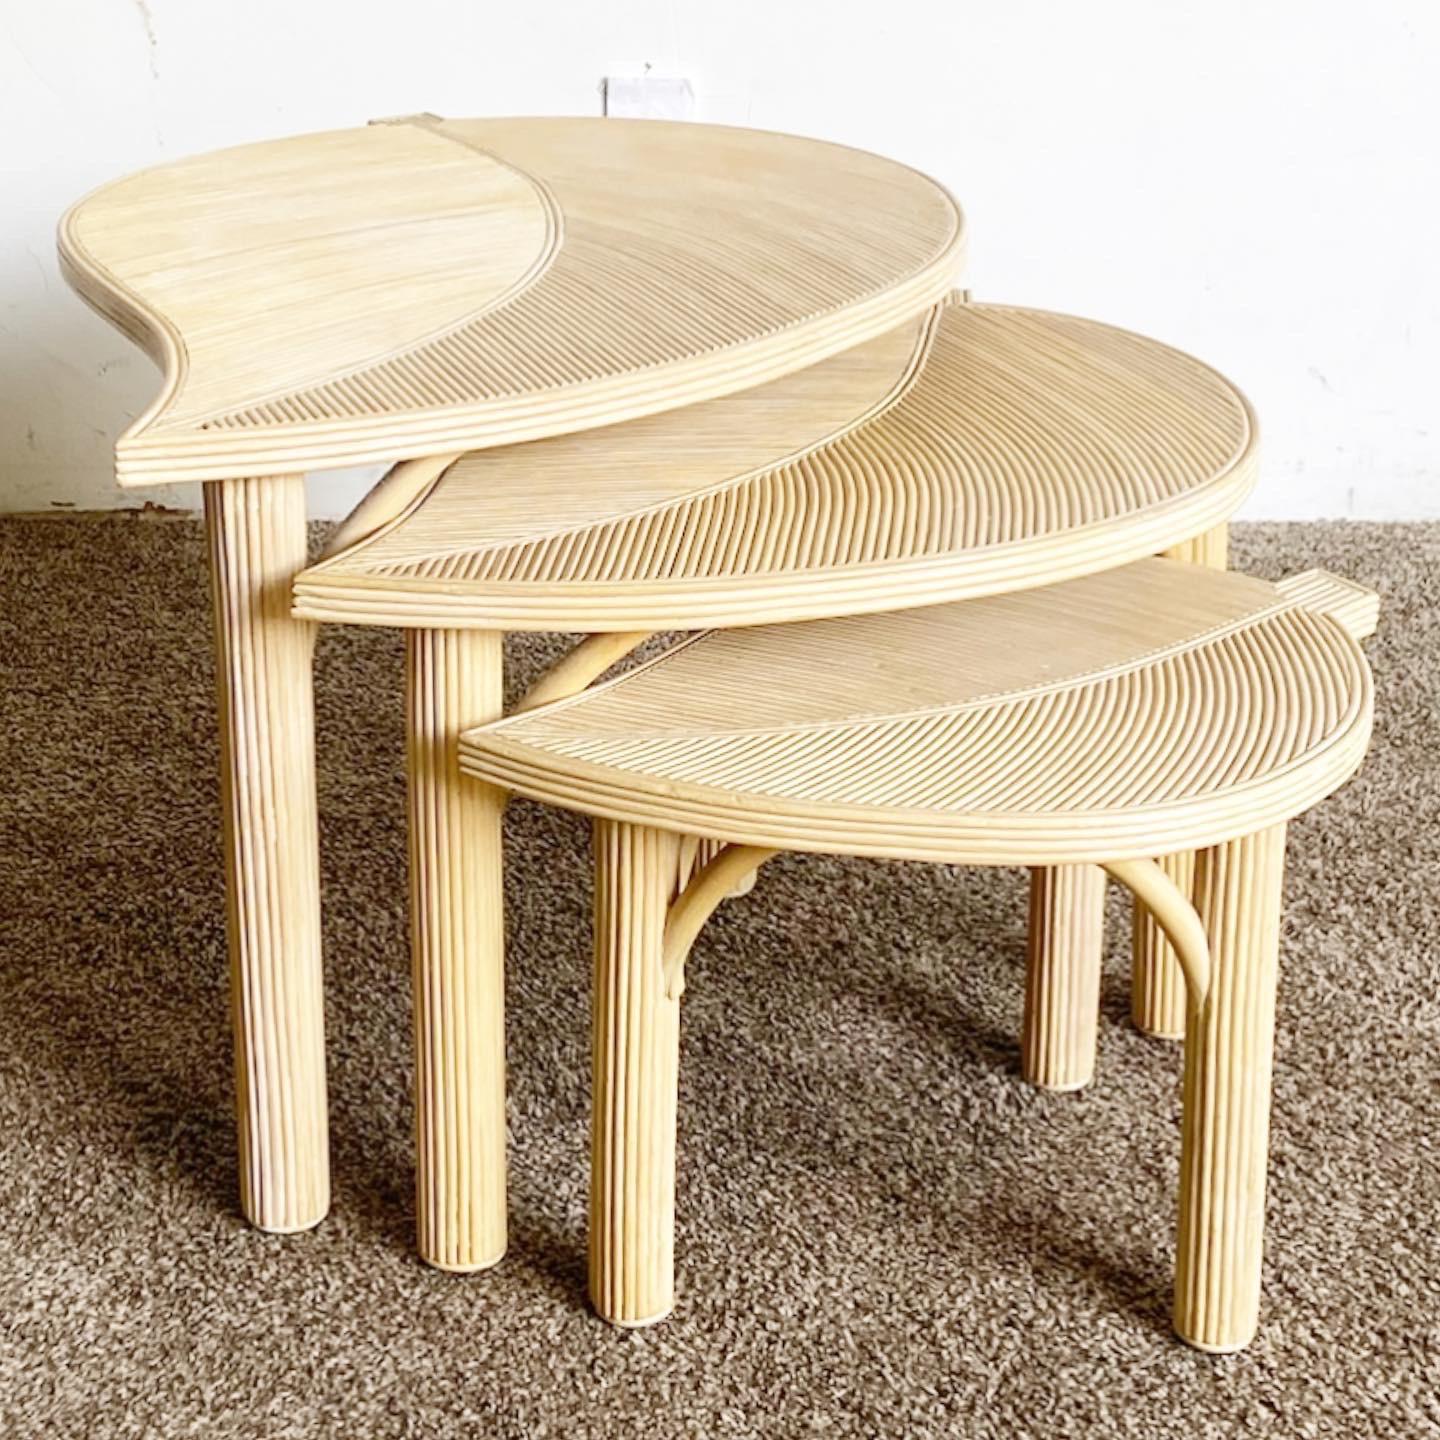 Boho Chic Pencil Reed Leaf Nesting Tables - Set of 3 For Sale 1